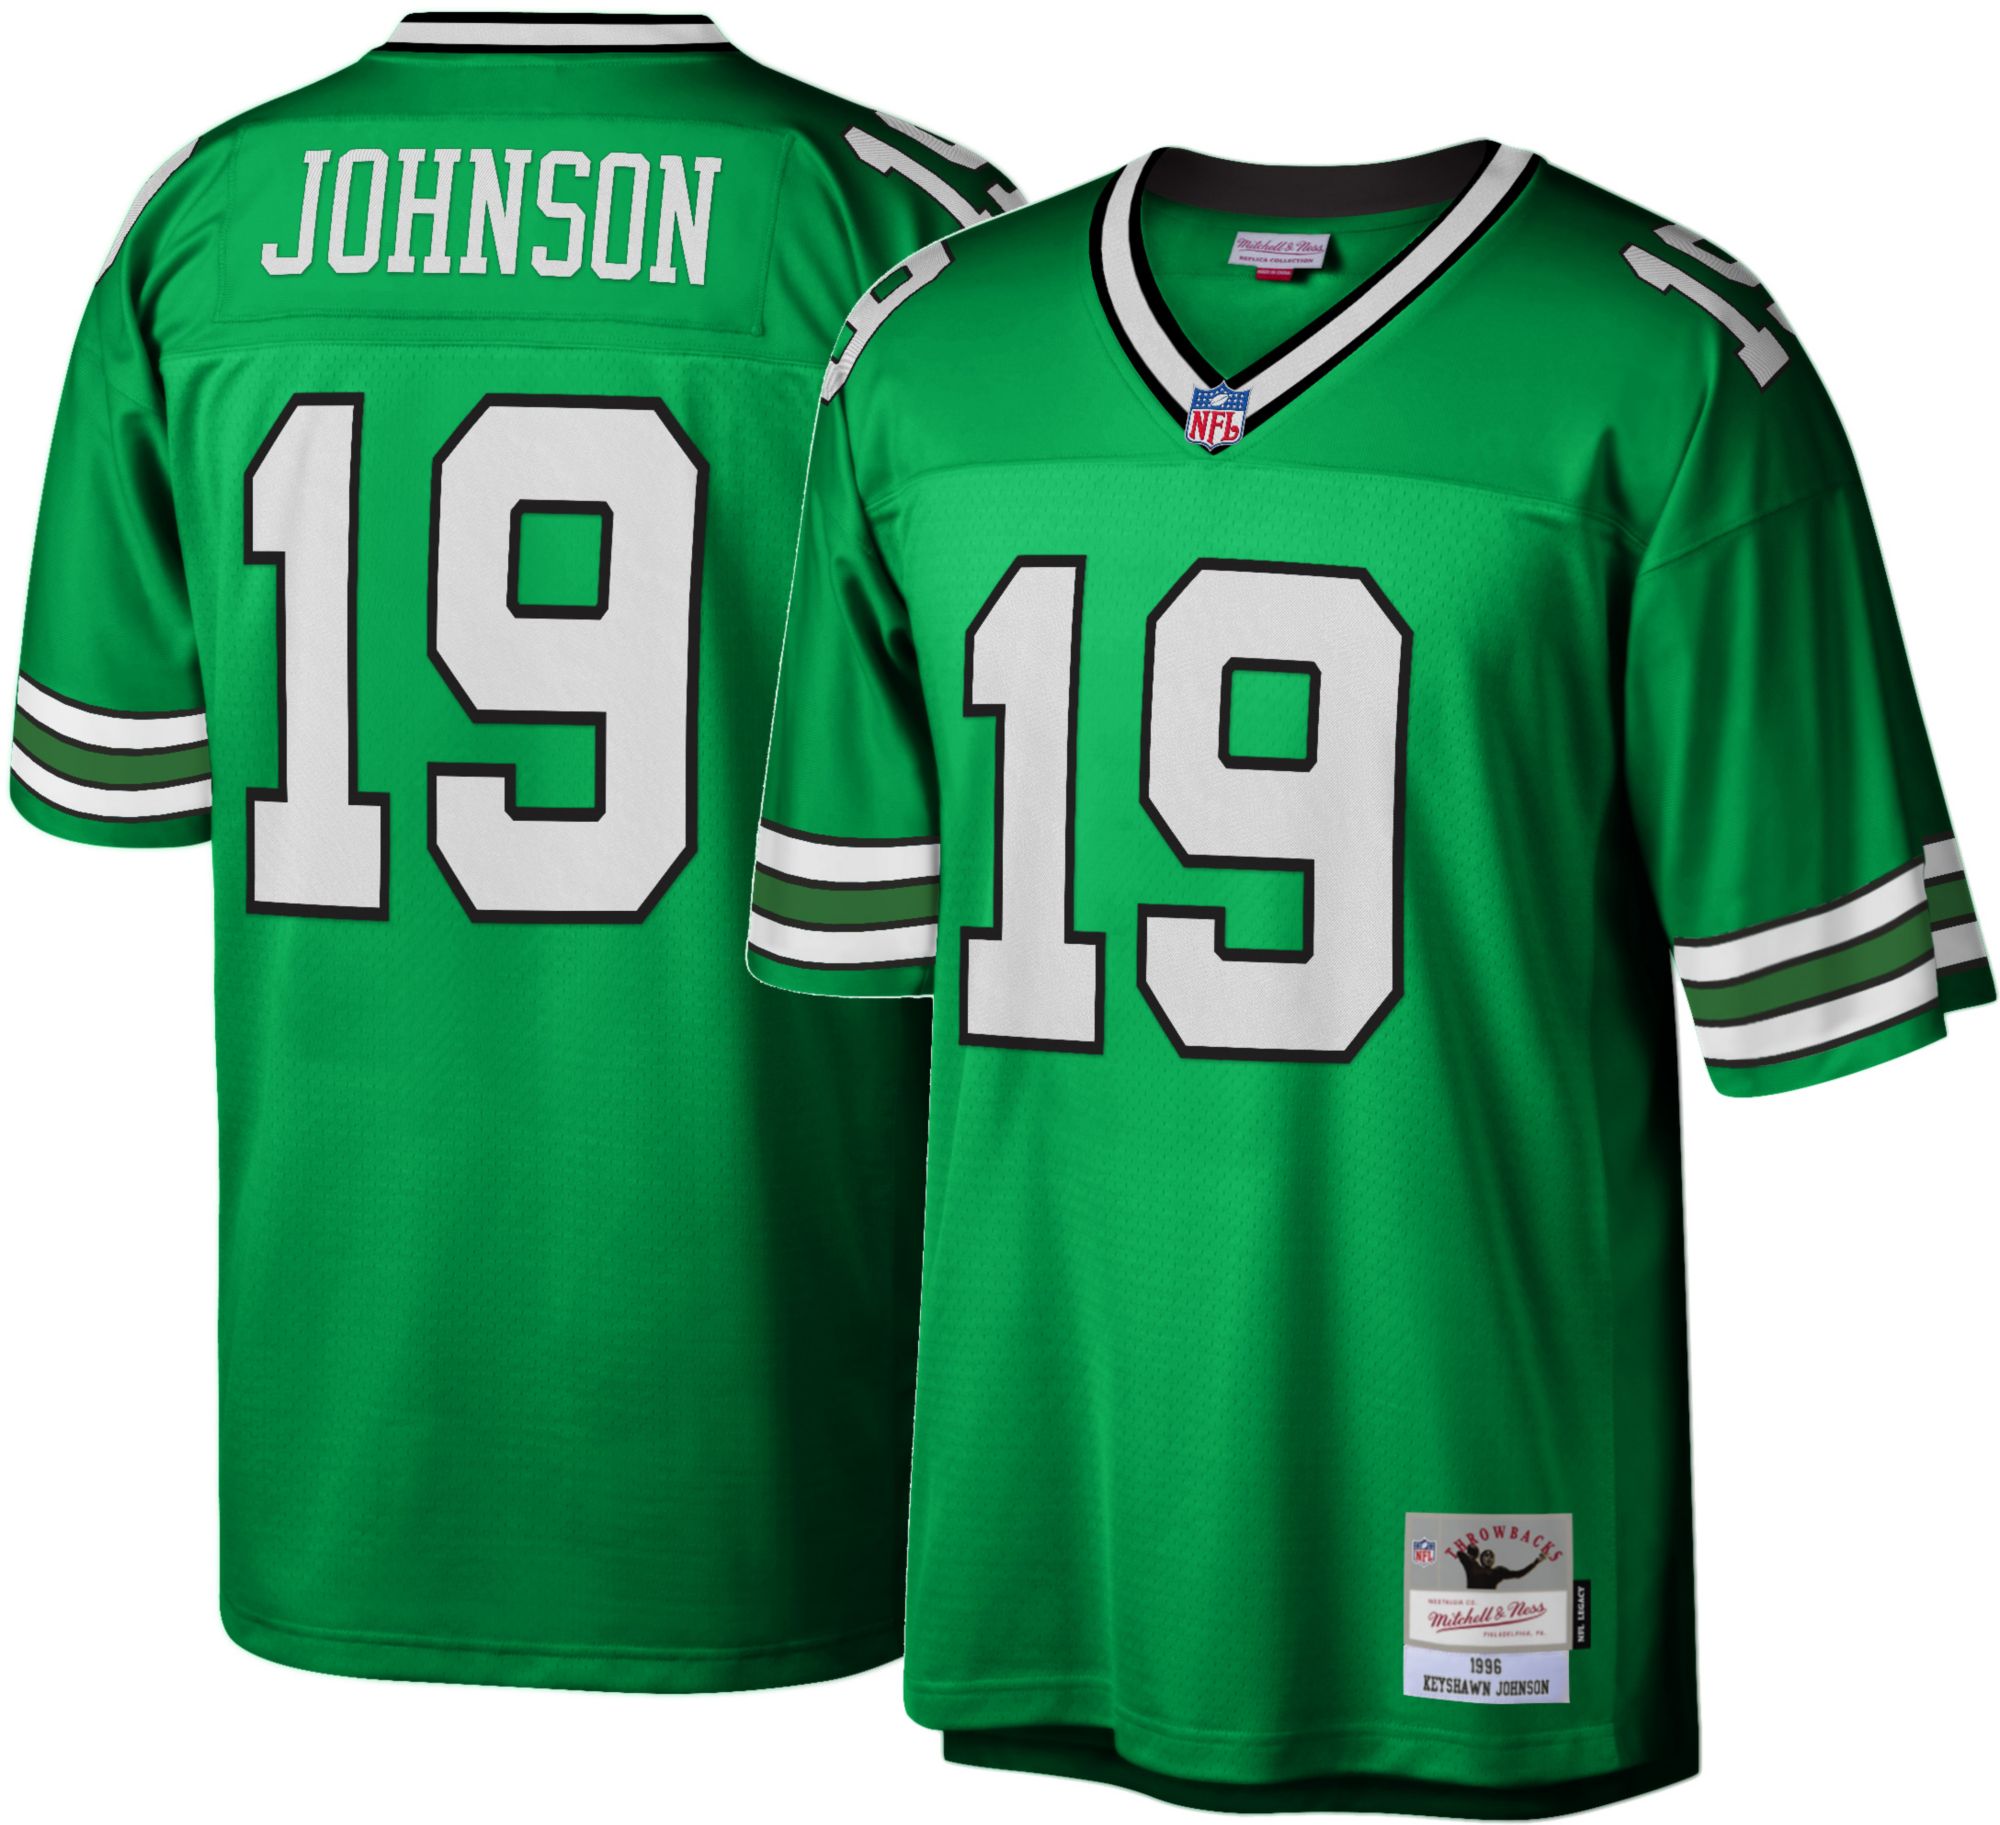 mitchell and ness jets